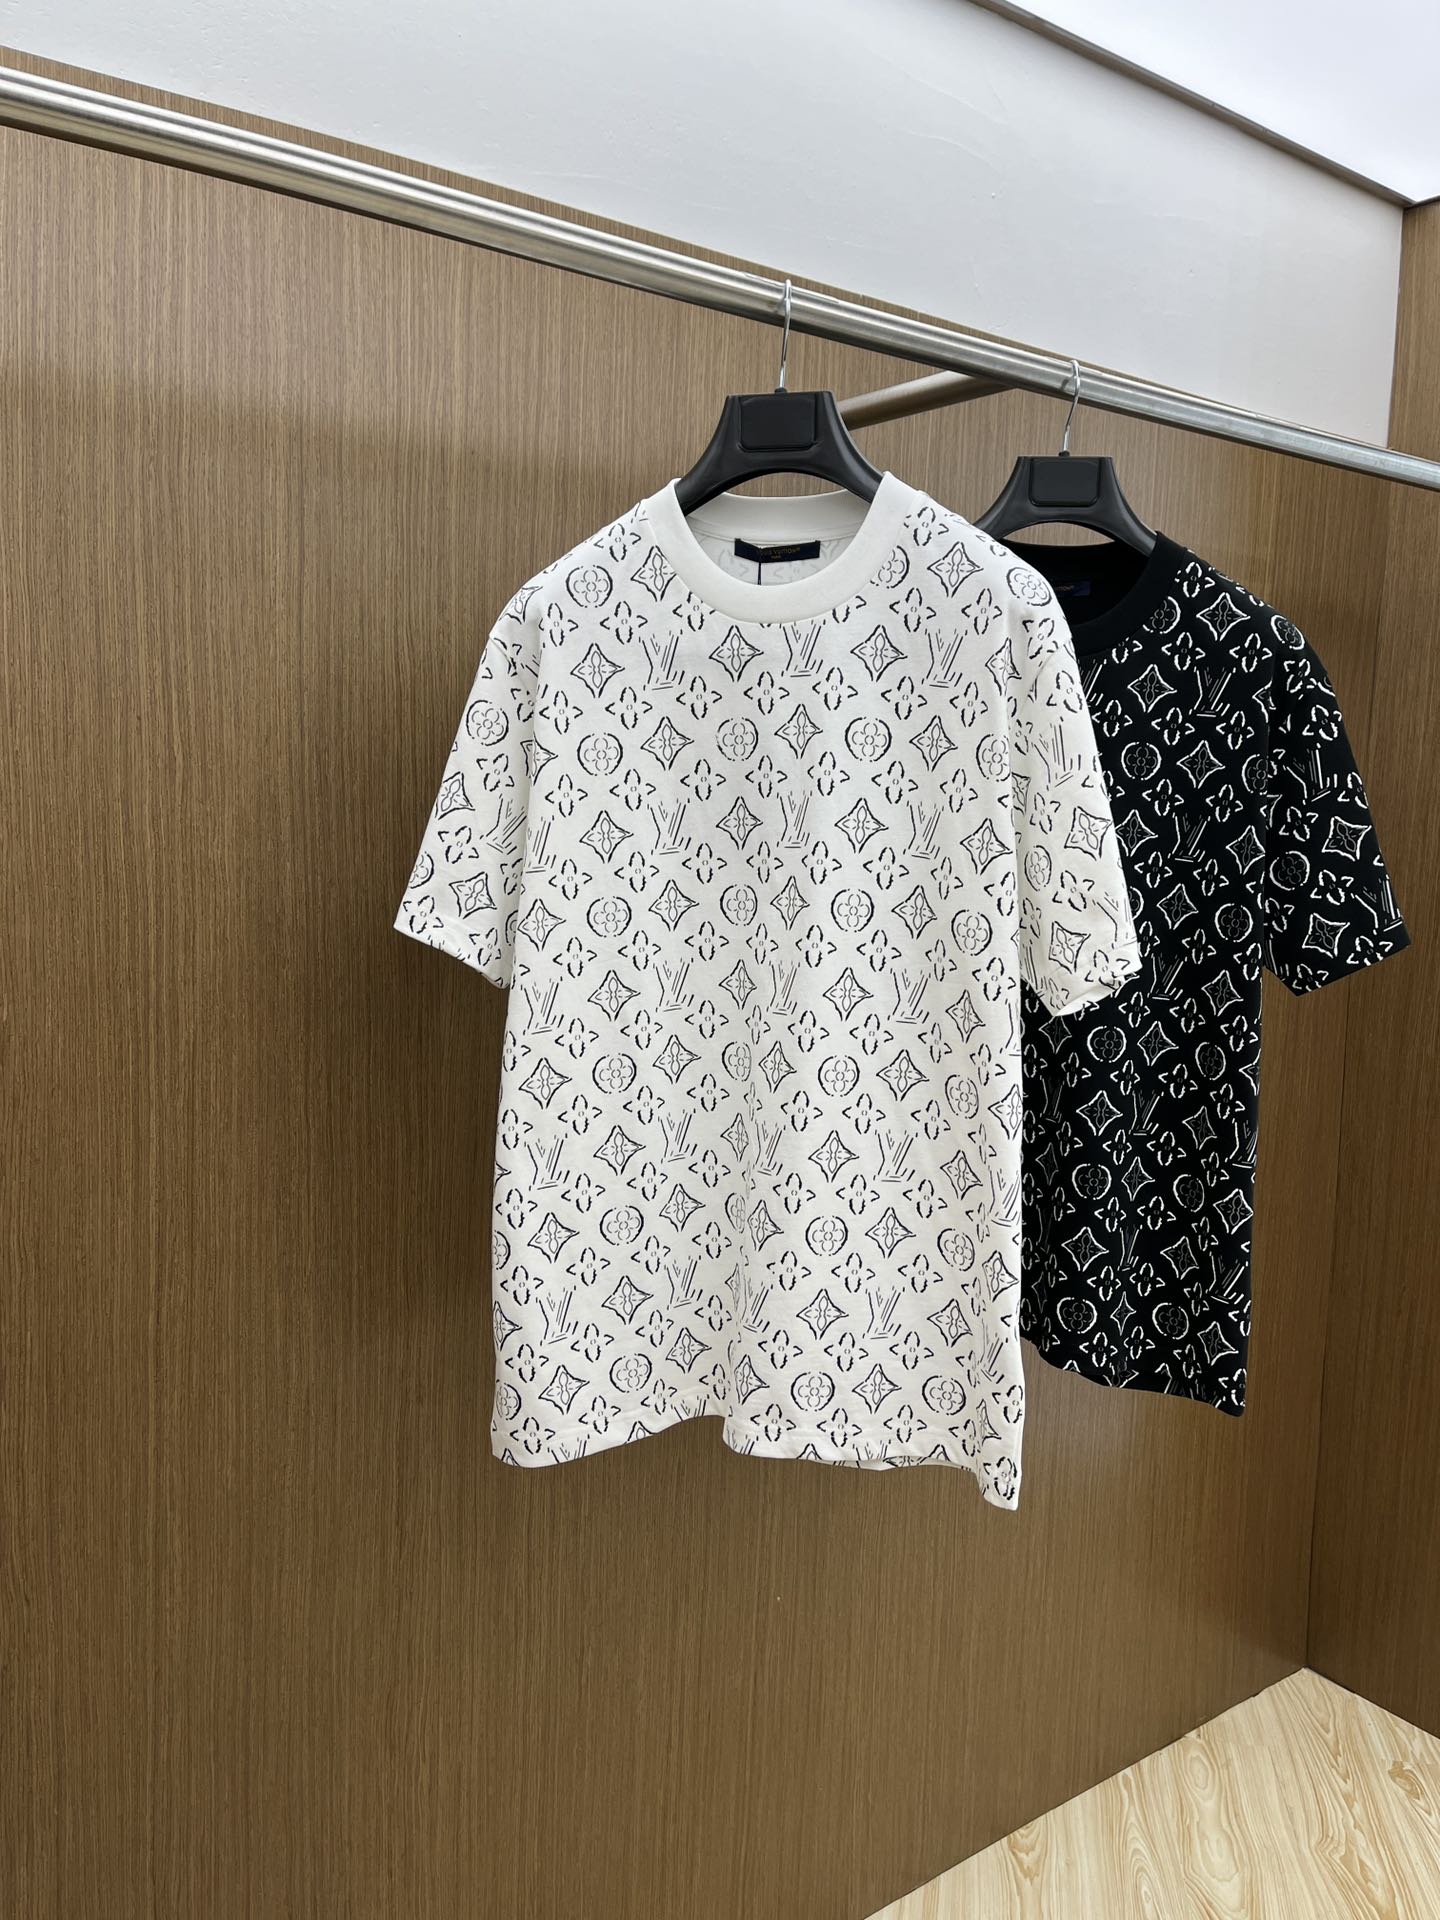 Louis Vuitton Clothing T-Shirt Cotton Spring Collection Fashion Short Sleeve